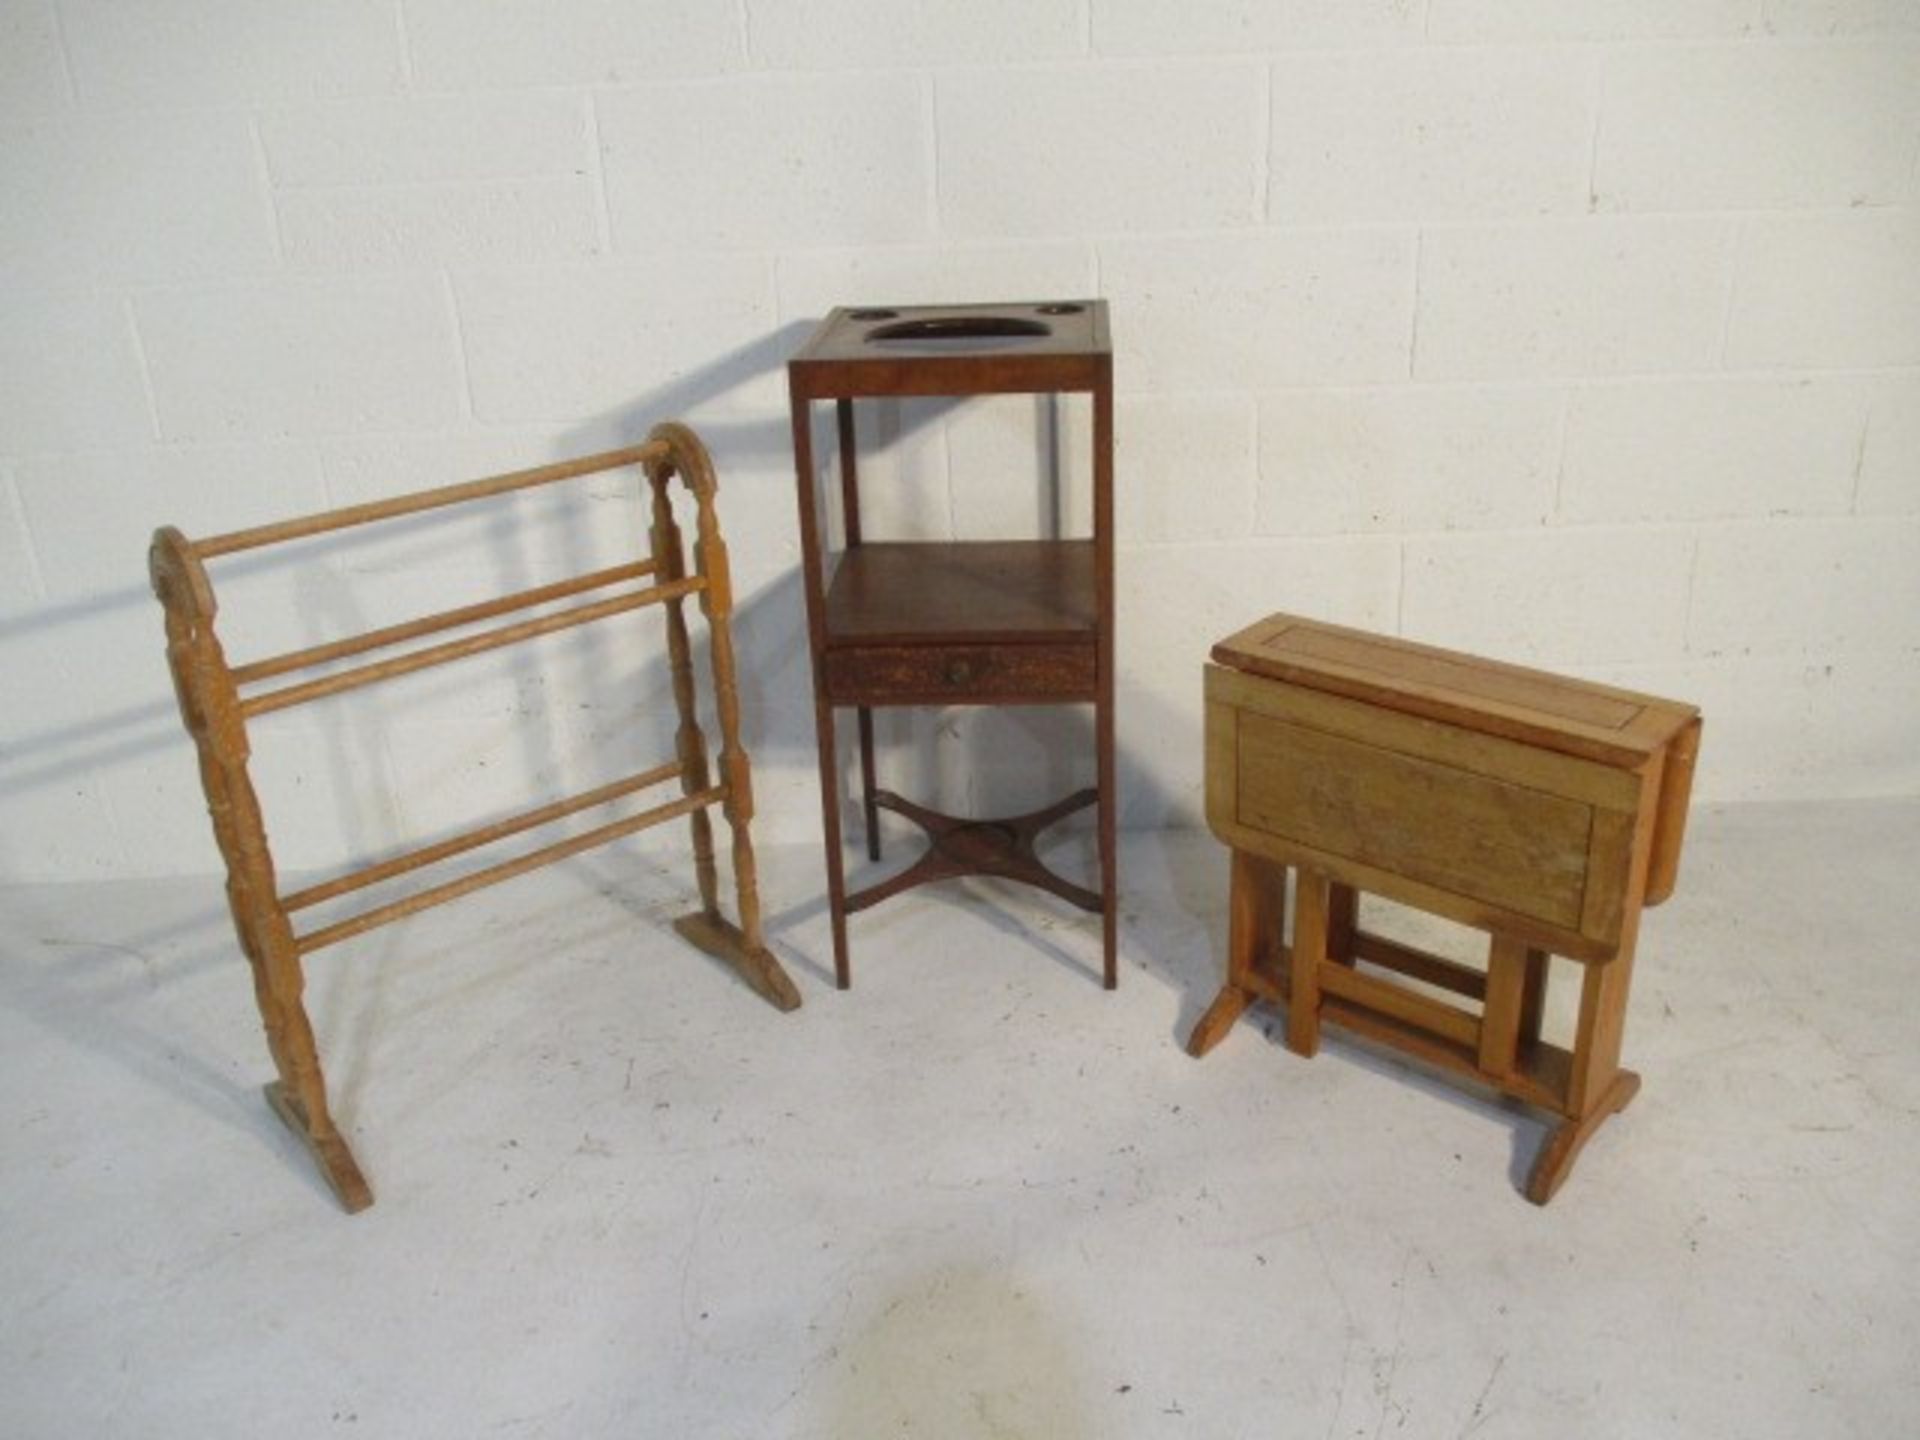 A small dropleaf table, washstand and towel rail